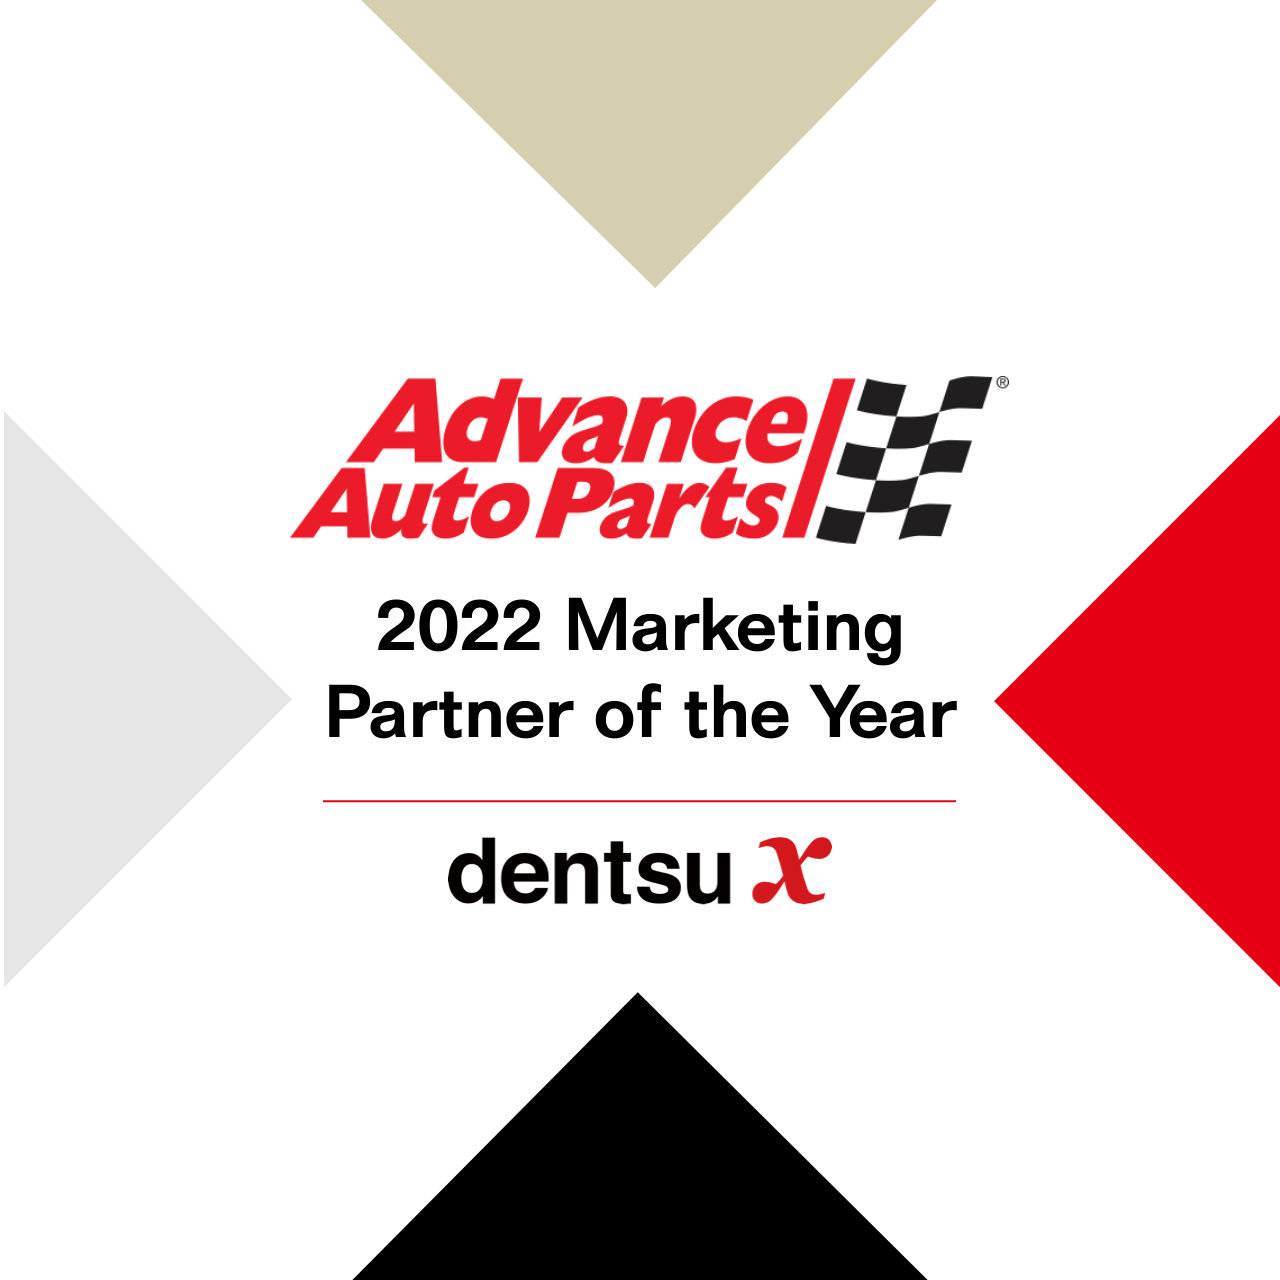 <p>dentsu X named Marketing Partner of the Year for their continued media partnership with Advance.</p>